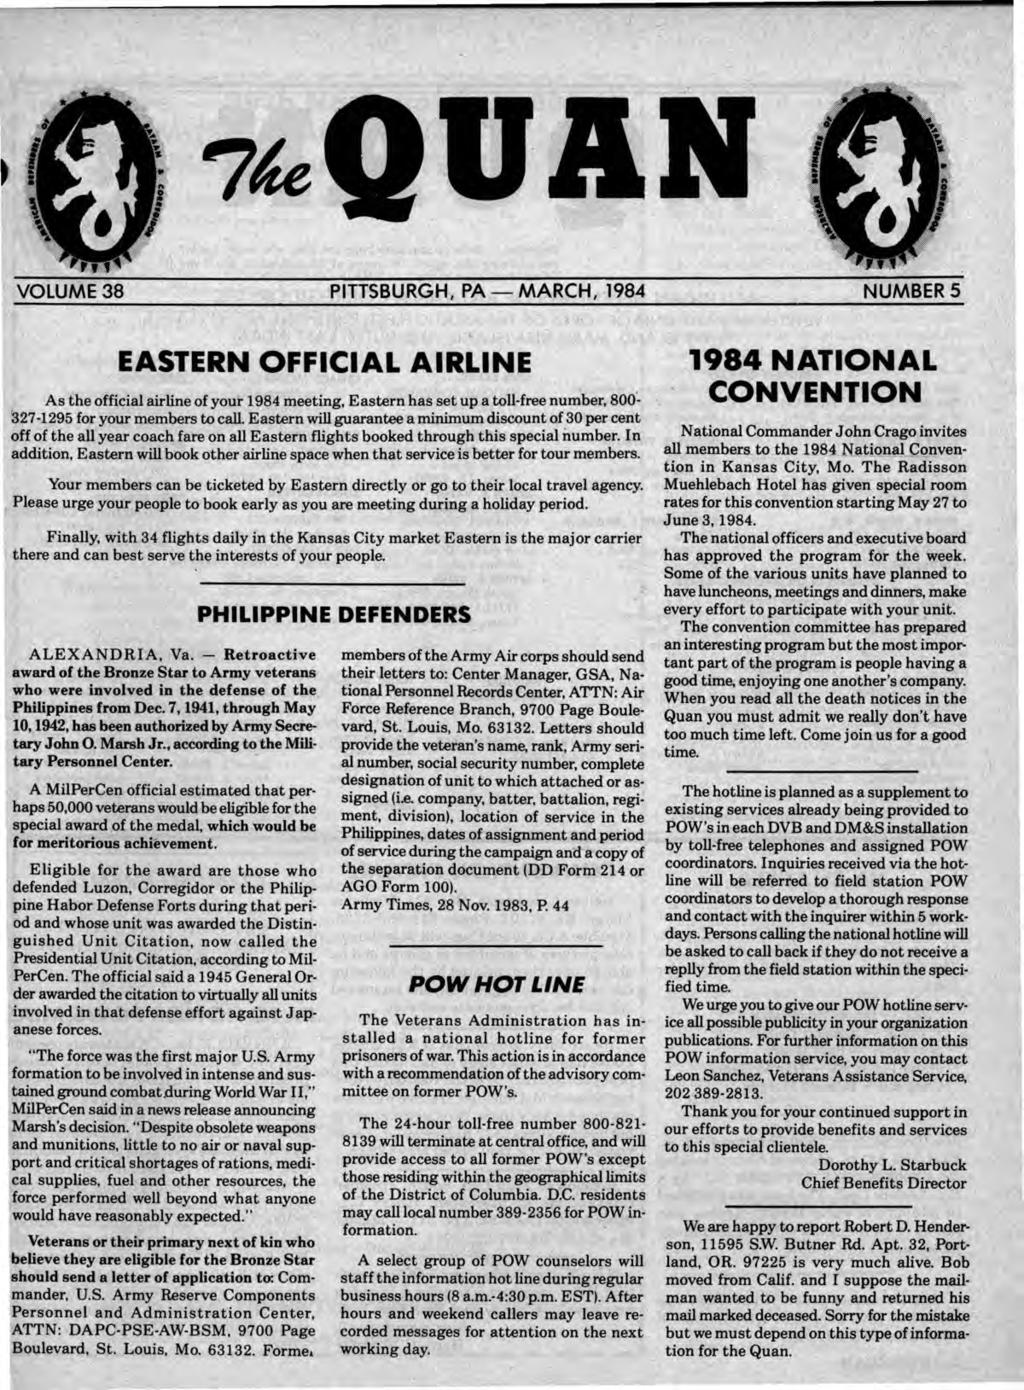 VOLUME 38 PITTSBURGH, PA - MARCH, 1984 EASTERN OFFICIAL AIRLINE As he official airline of your 1984 meeing, Easern has se up a oll-free number, 800'- 327-1295 for your members o call.